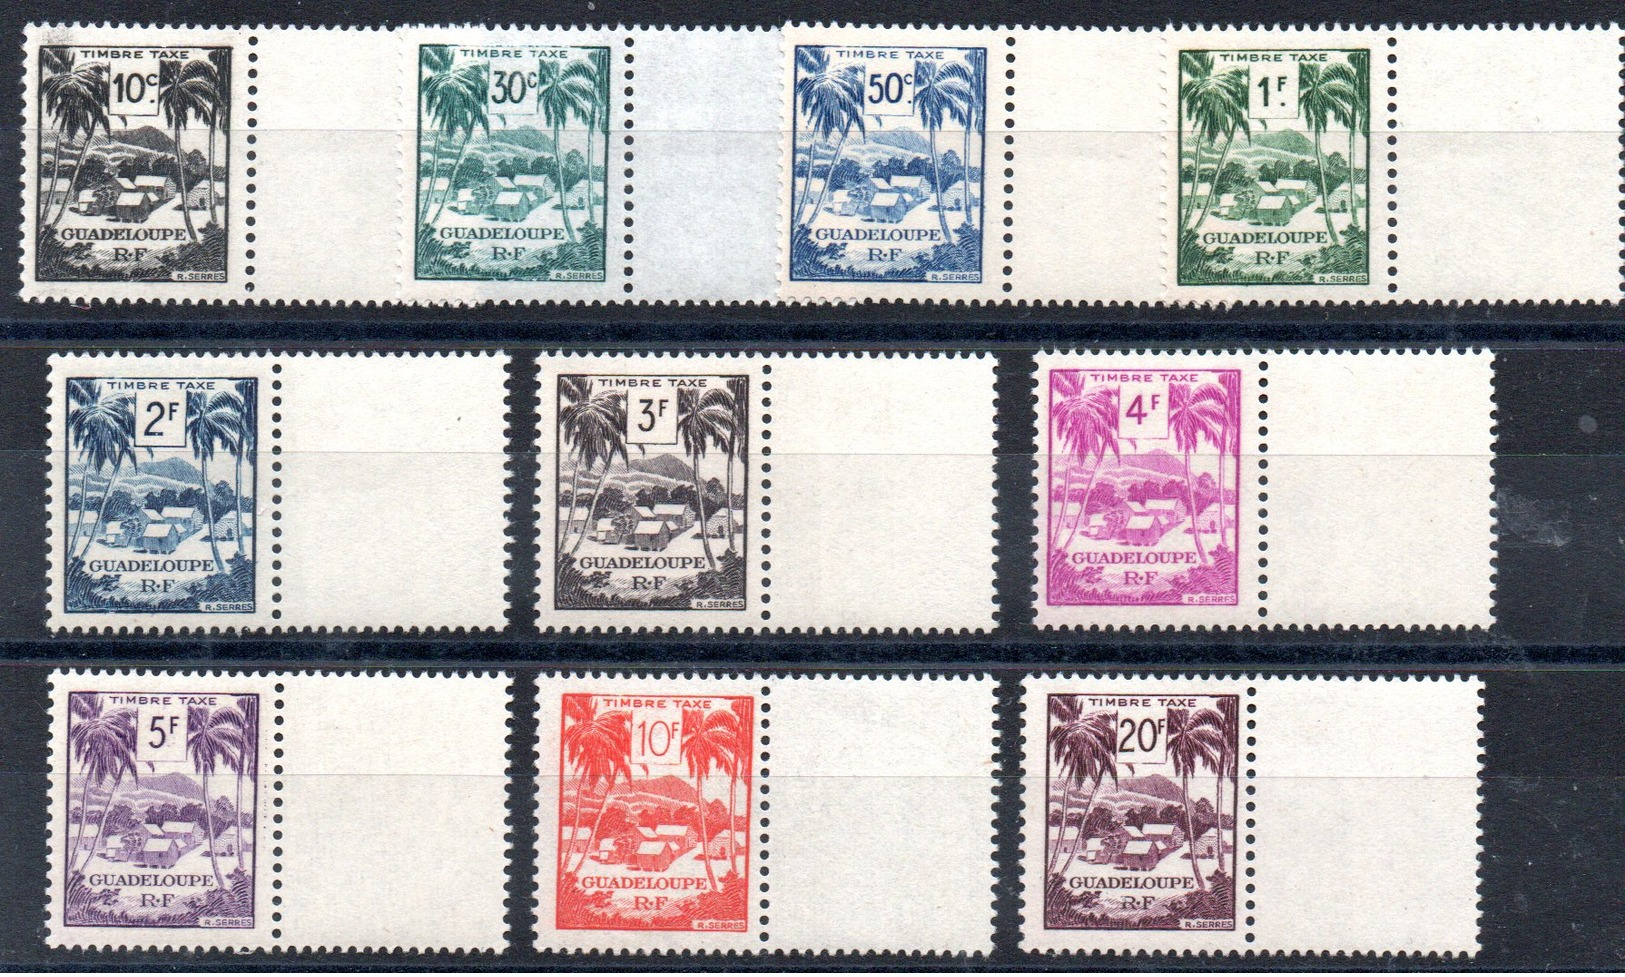 GUADELOUPE - YT N° 41 à 50 - Neufs ** - MNH - Cote: 15,00 € - Timbres-taxe